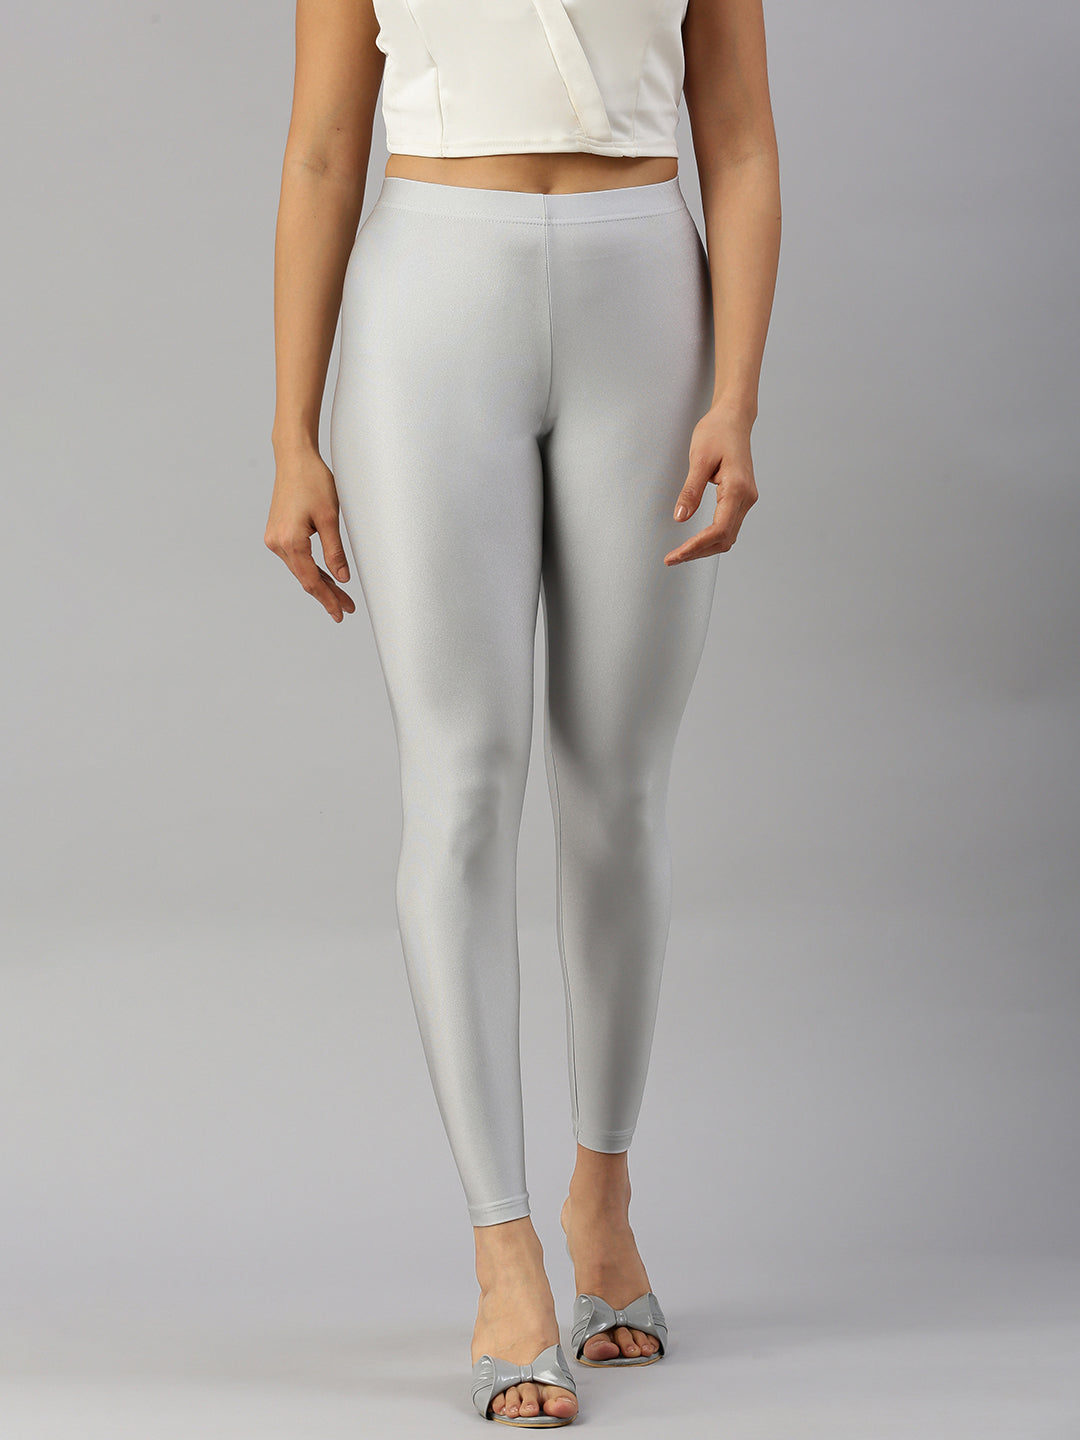 Prisma Shimmer Leggings in Neo Silver for a Chic Look